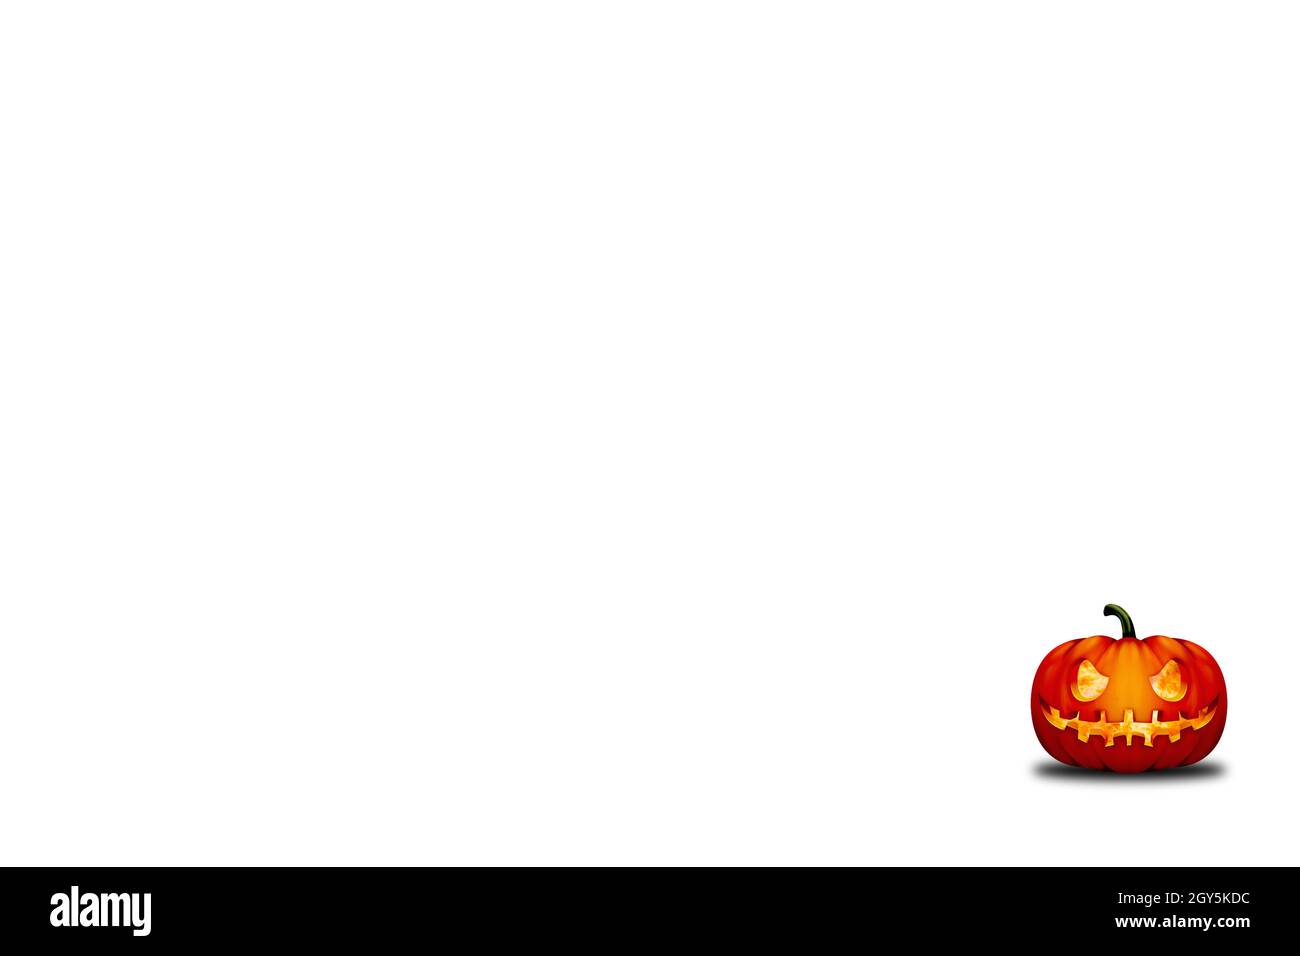 The Pumpkins isolated on a white background on Halloween Concept. Stock Photo